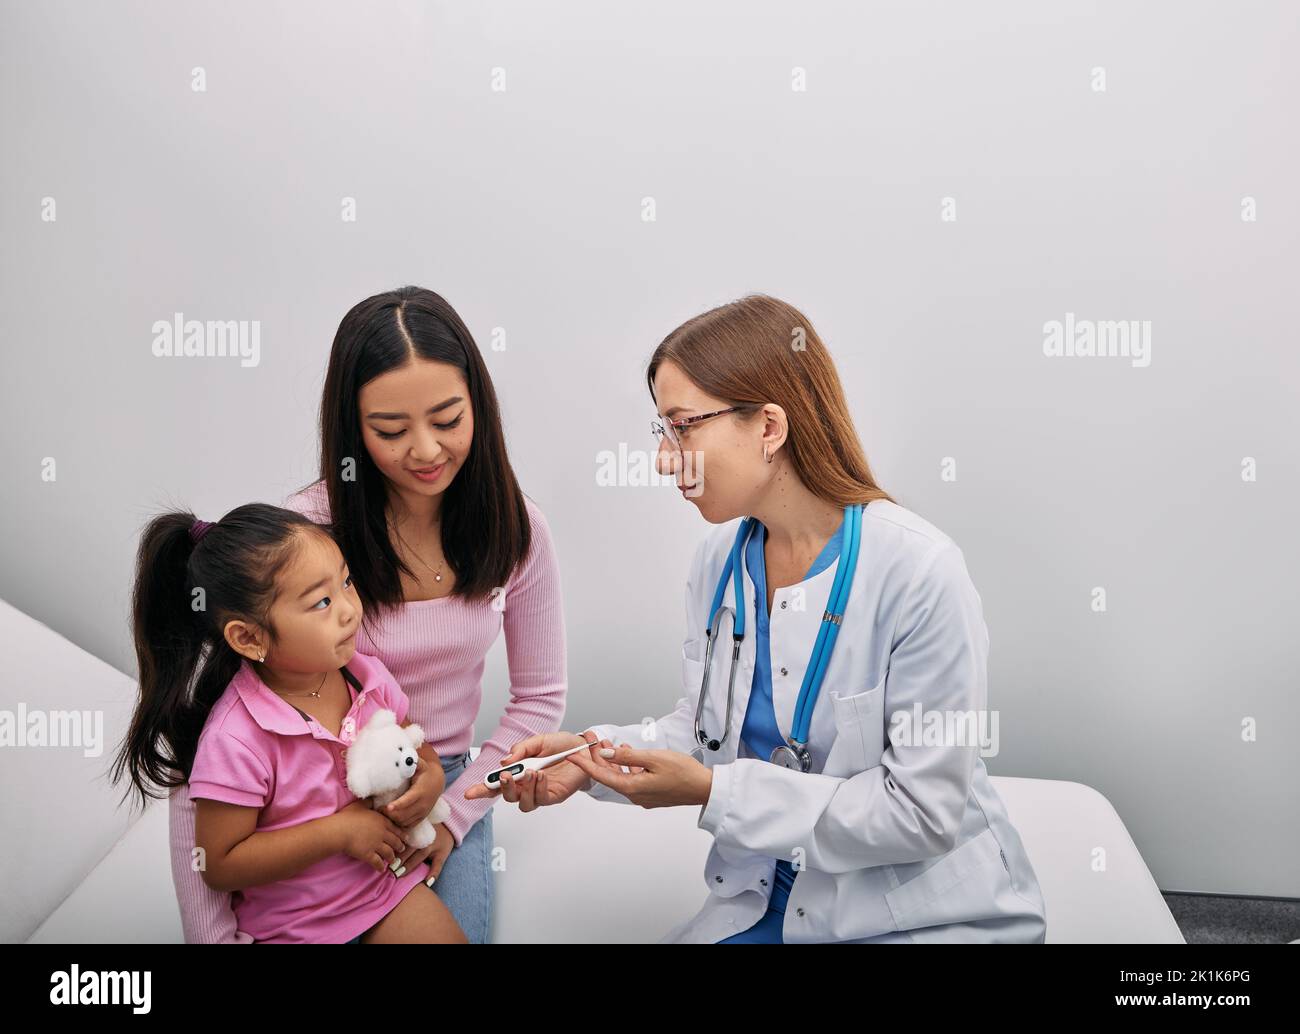 Japanese parent with female child while medical exam at hospital. Pediatrician consultation Stock Photo